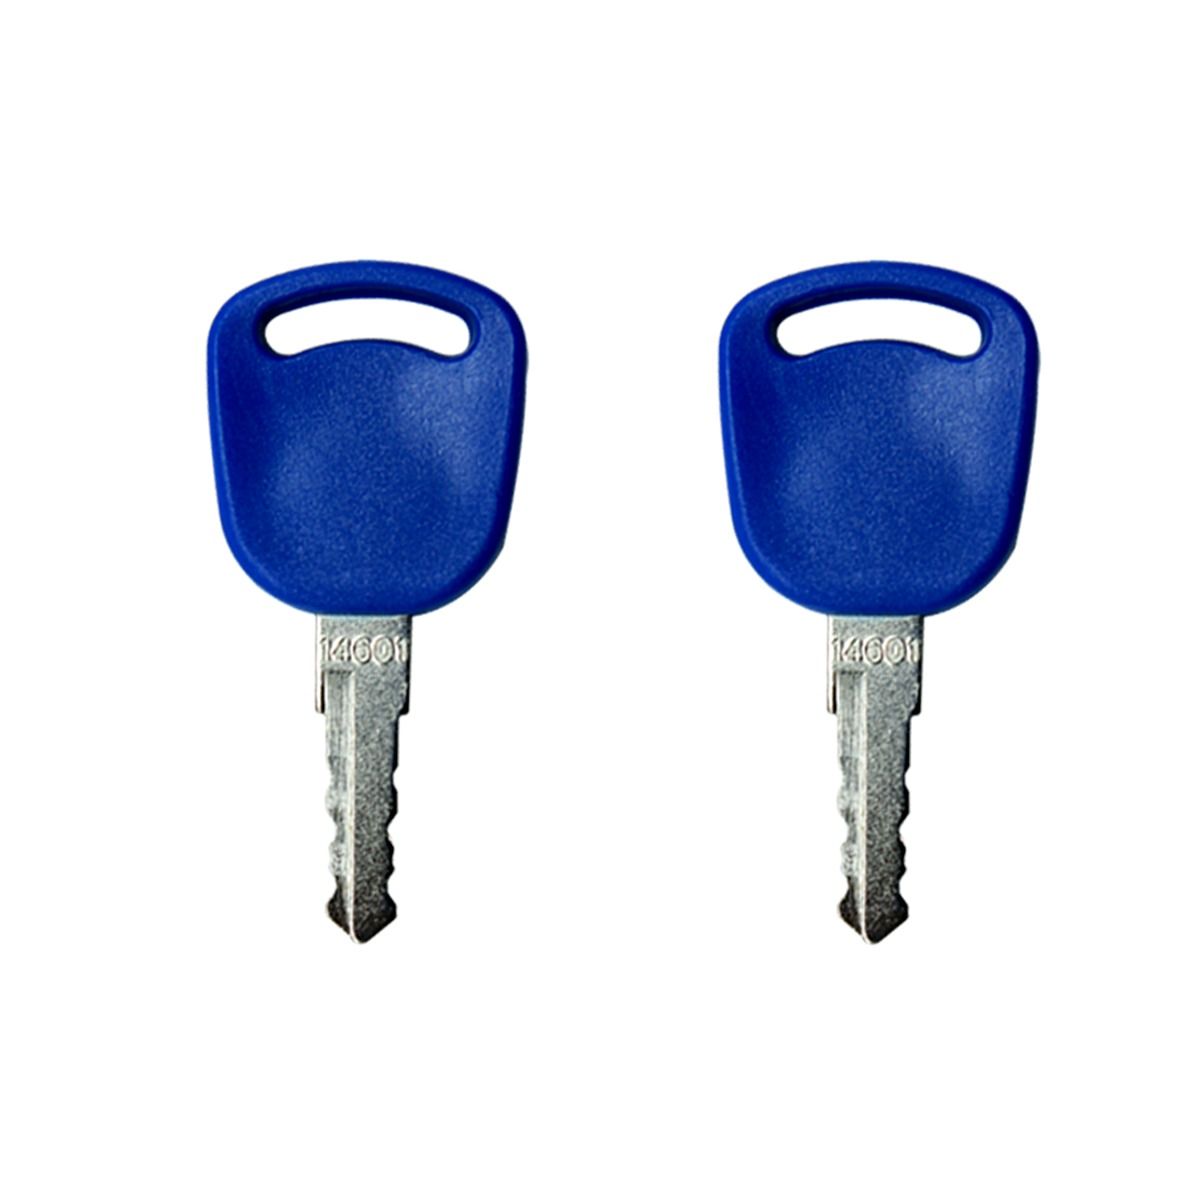 2PCS Ignition Key New Holland Ford